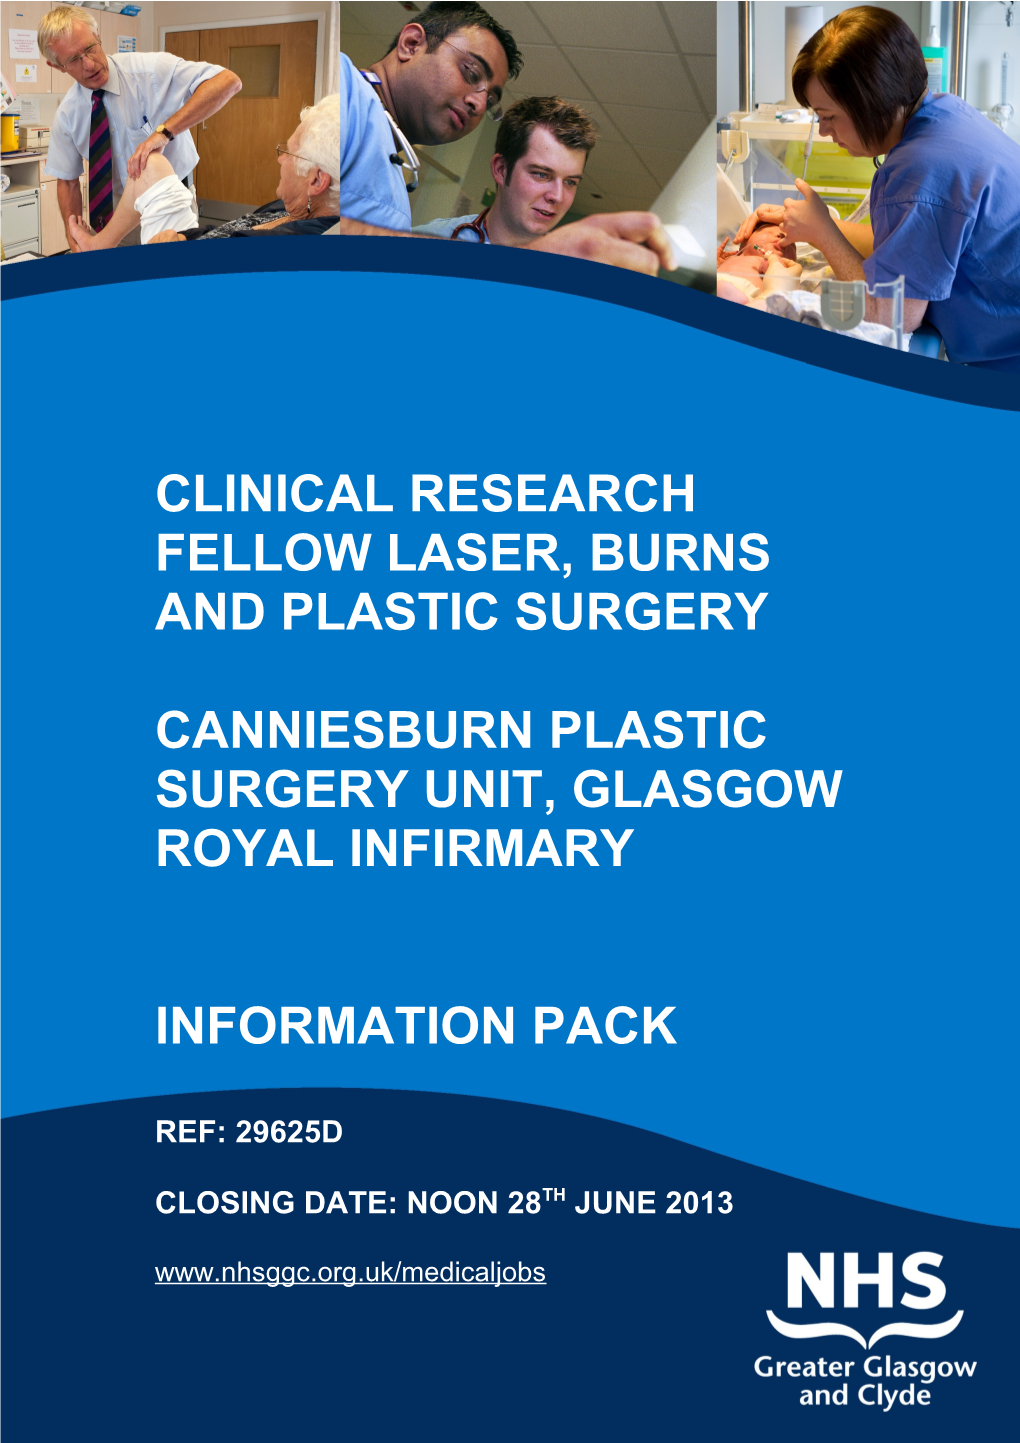 Clinical Research Fellow Laser, Burns and Plastic Surgery